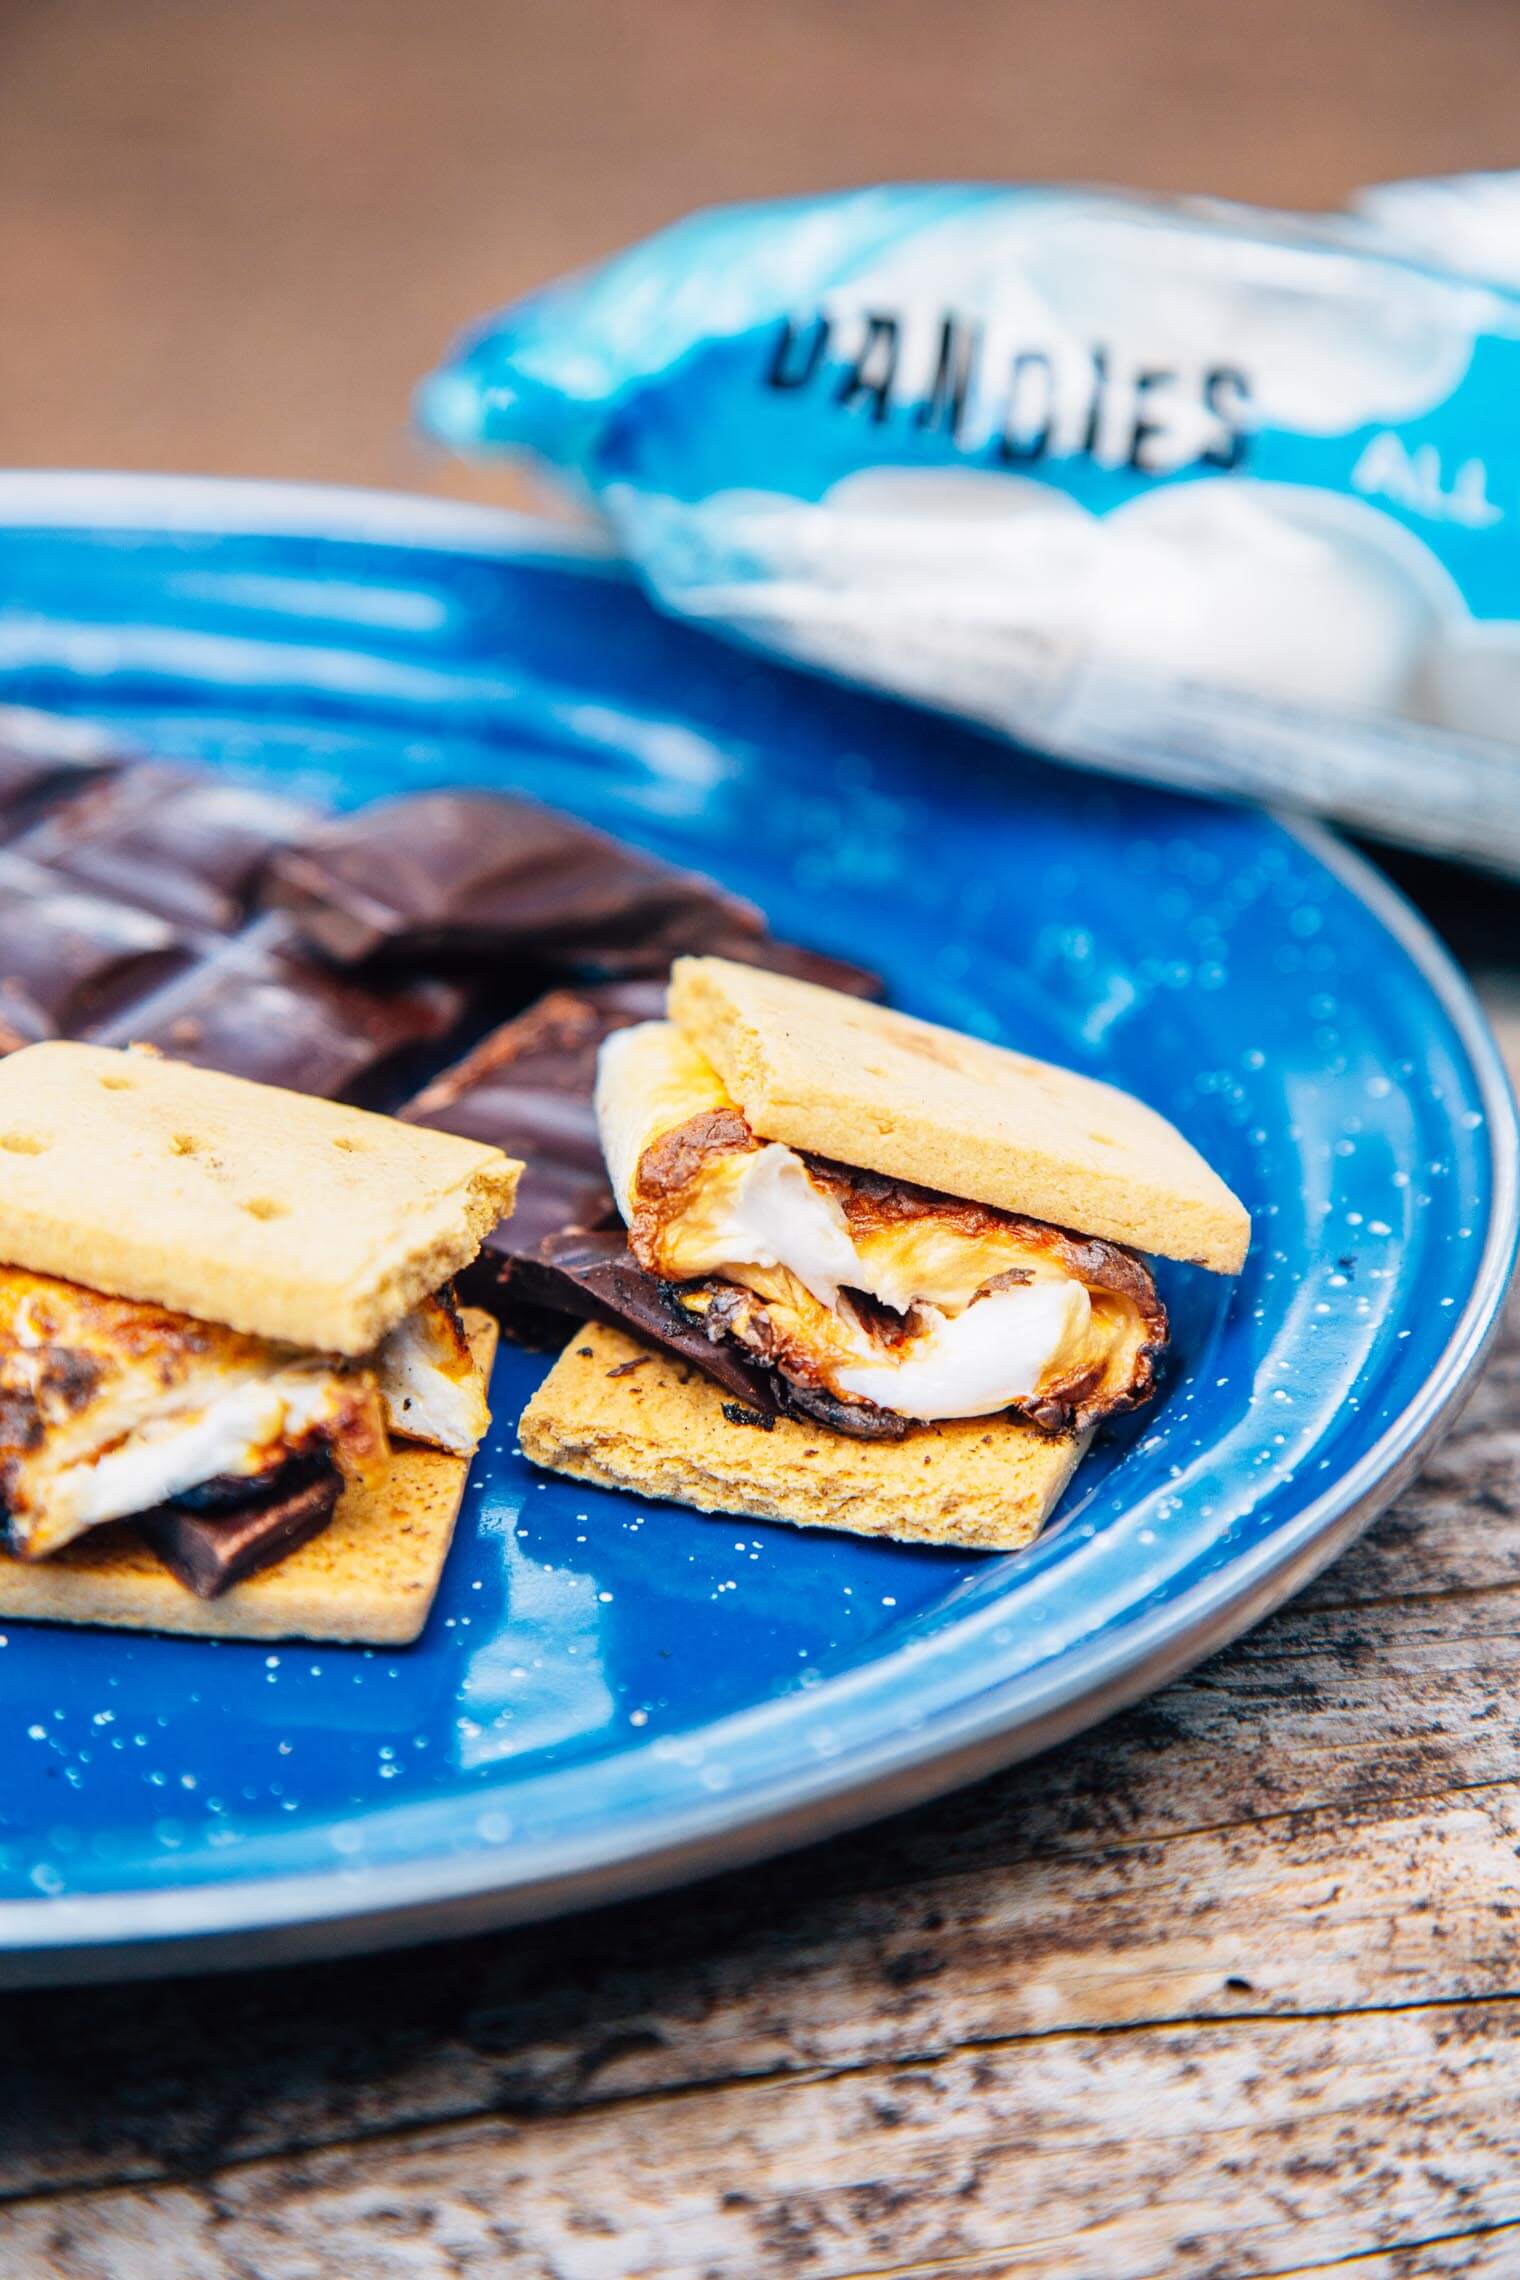 To s'mores and ingredients on a blue plate